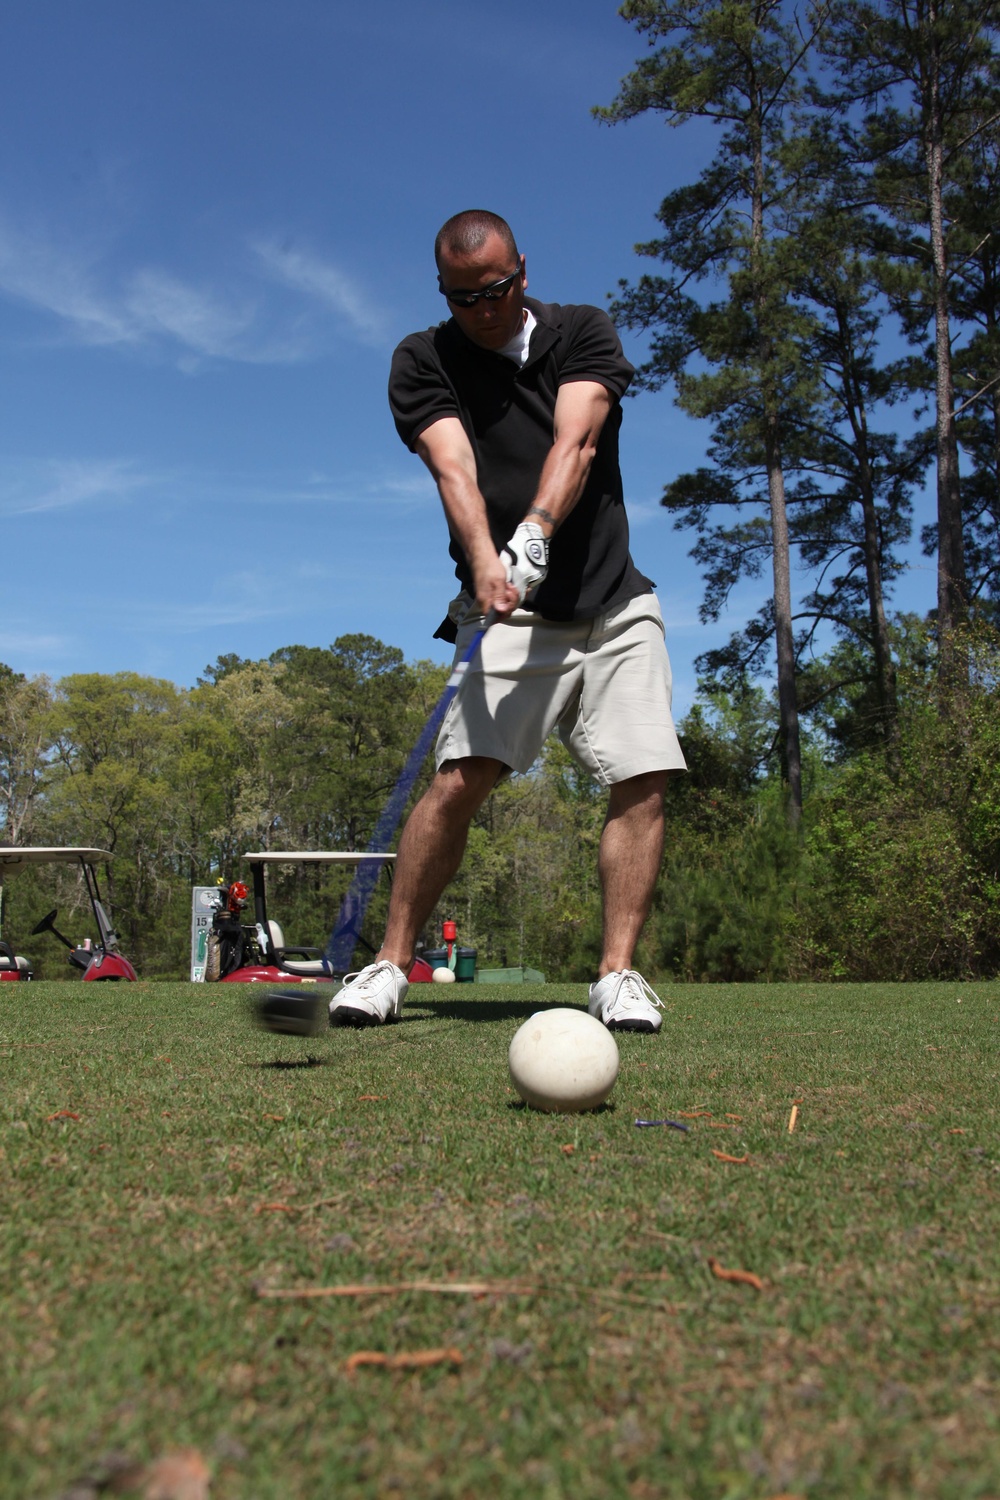 Cherry Point NMCRS tees off with golf tournament fund drive